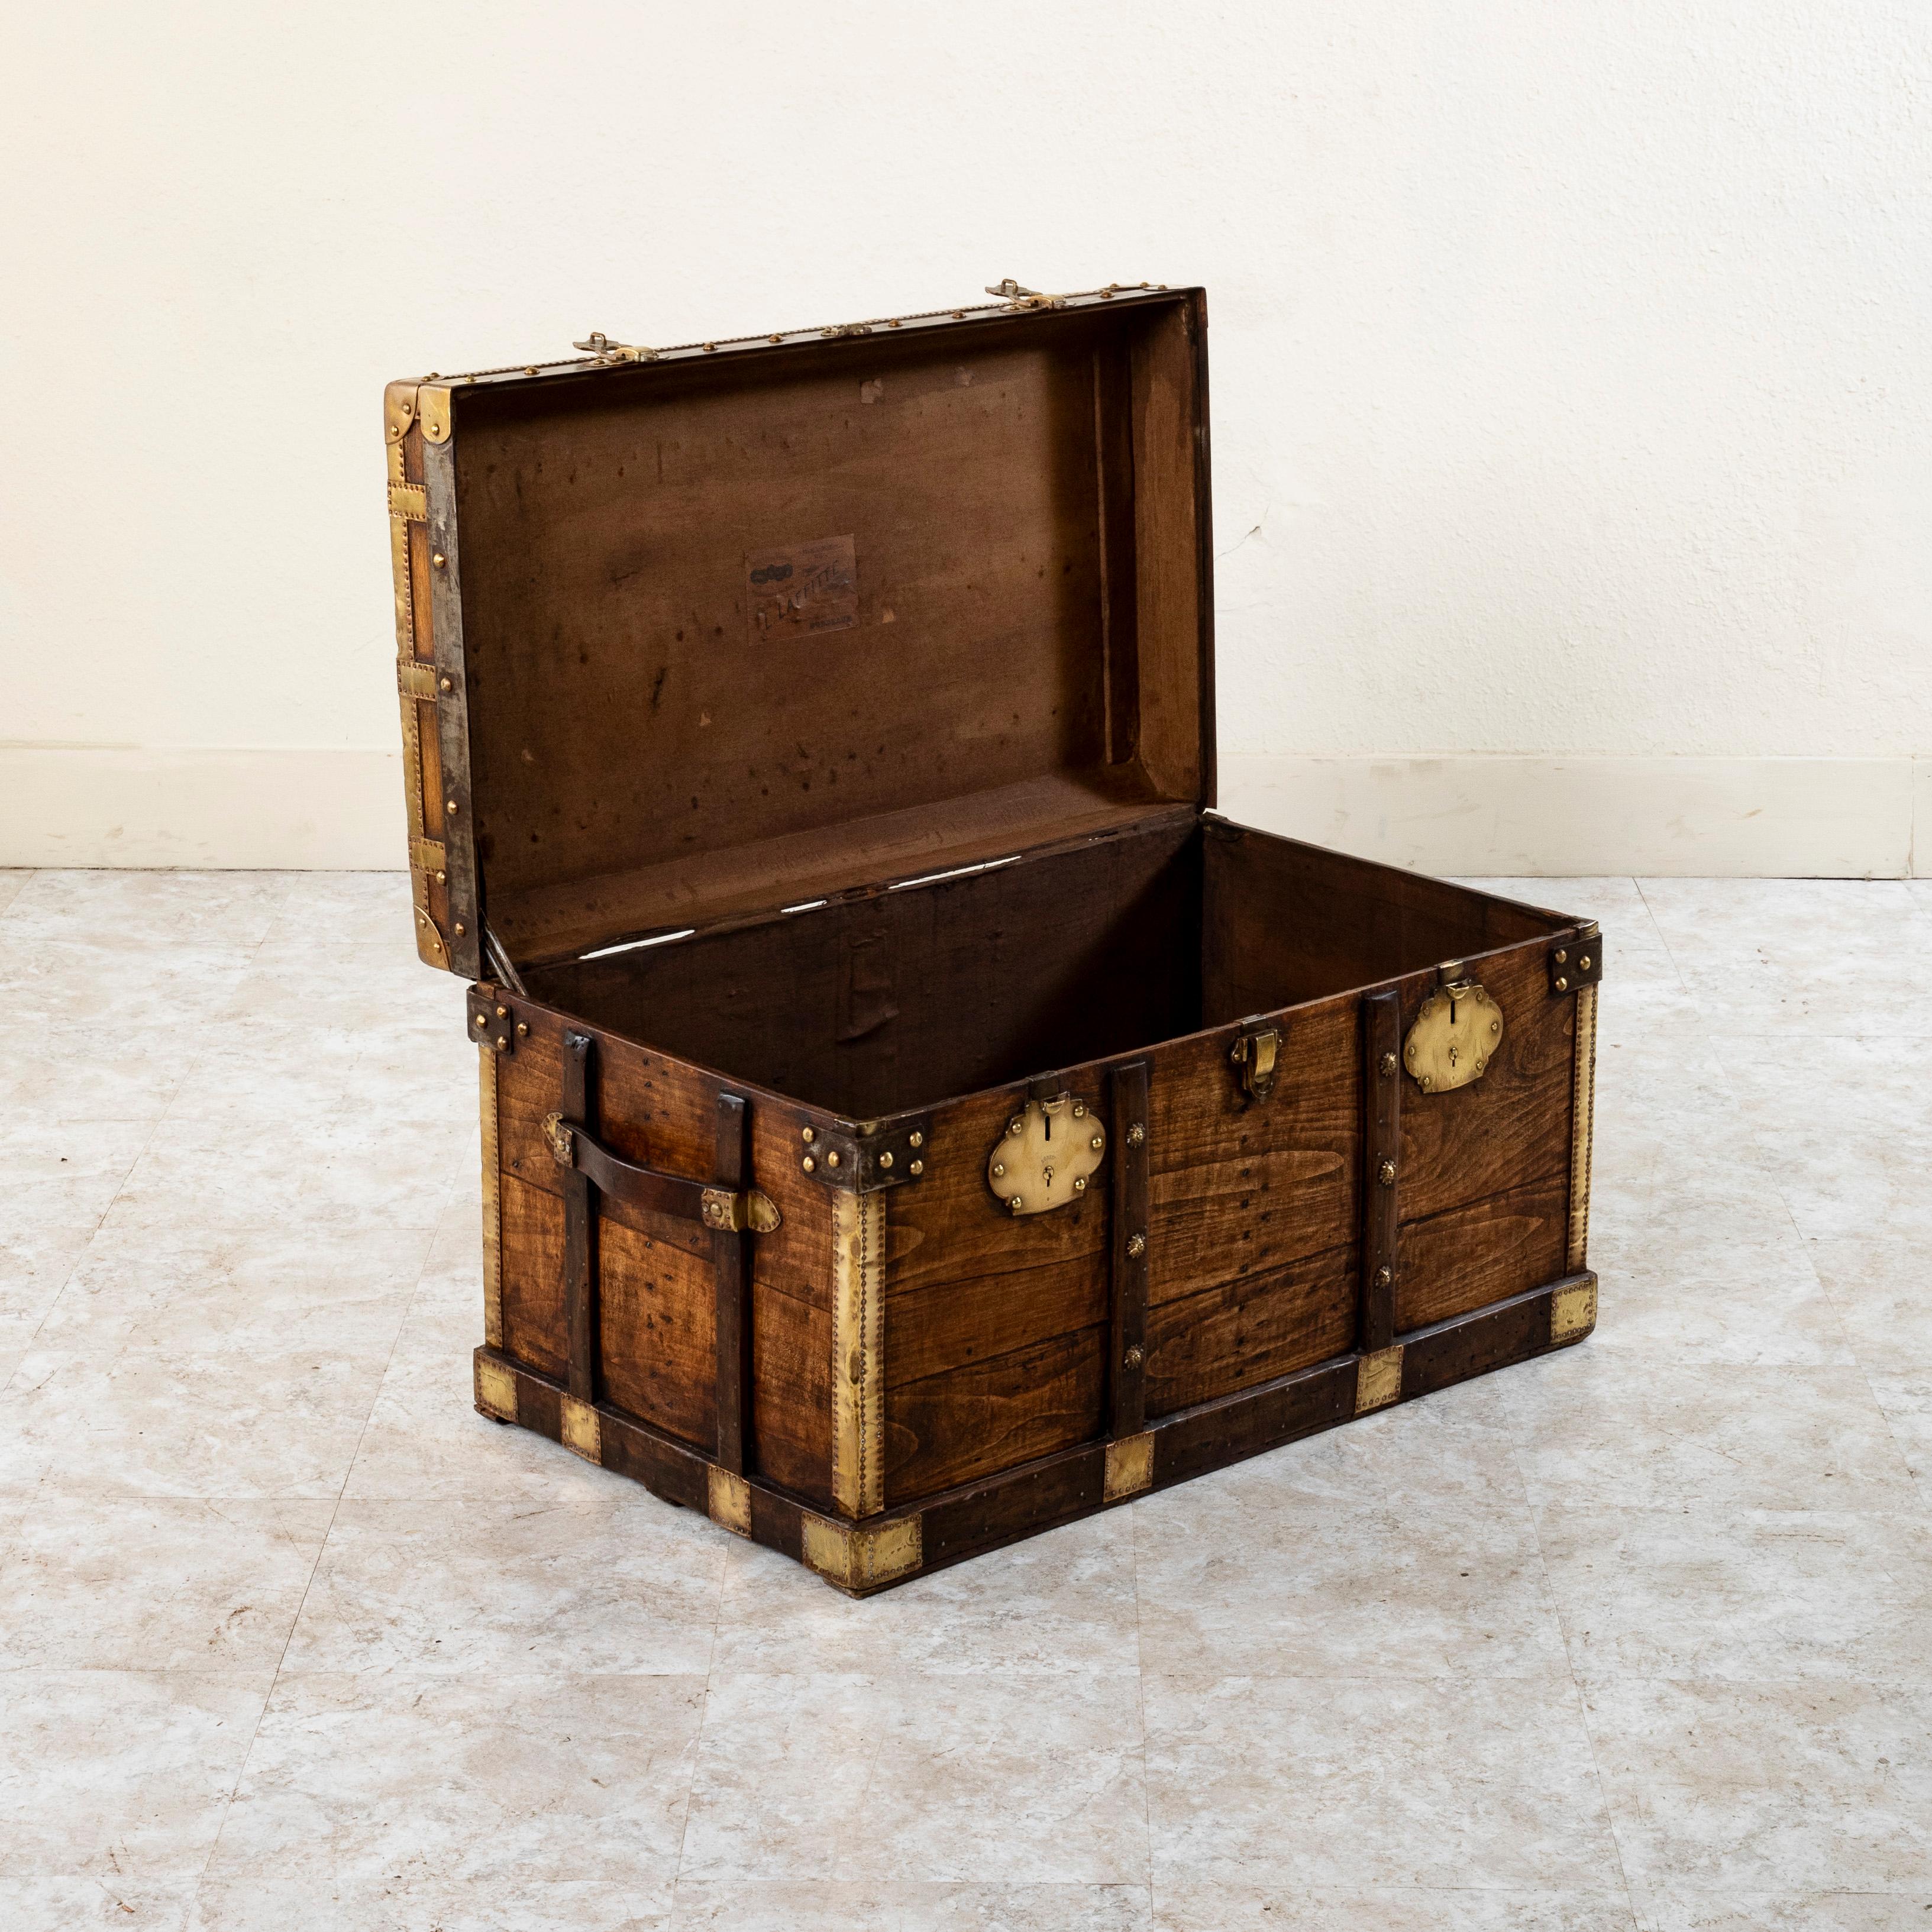 French Wooden Steam Trunk with Runners, Brass, Iron, Leather Details, circa 1880 For Sale 3